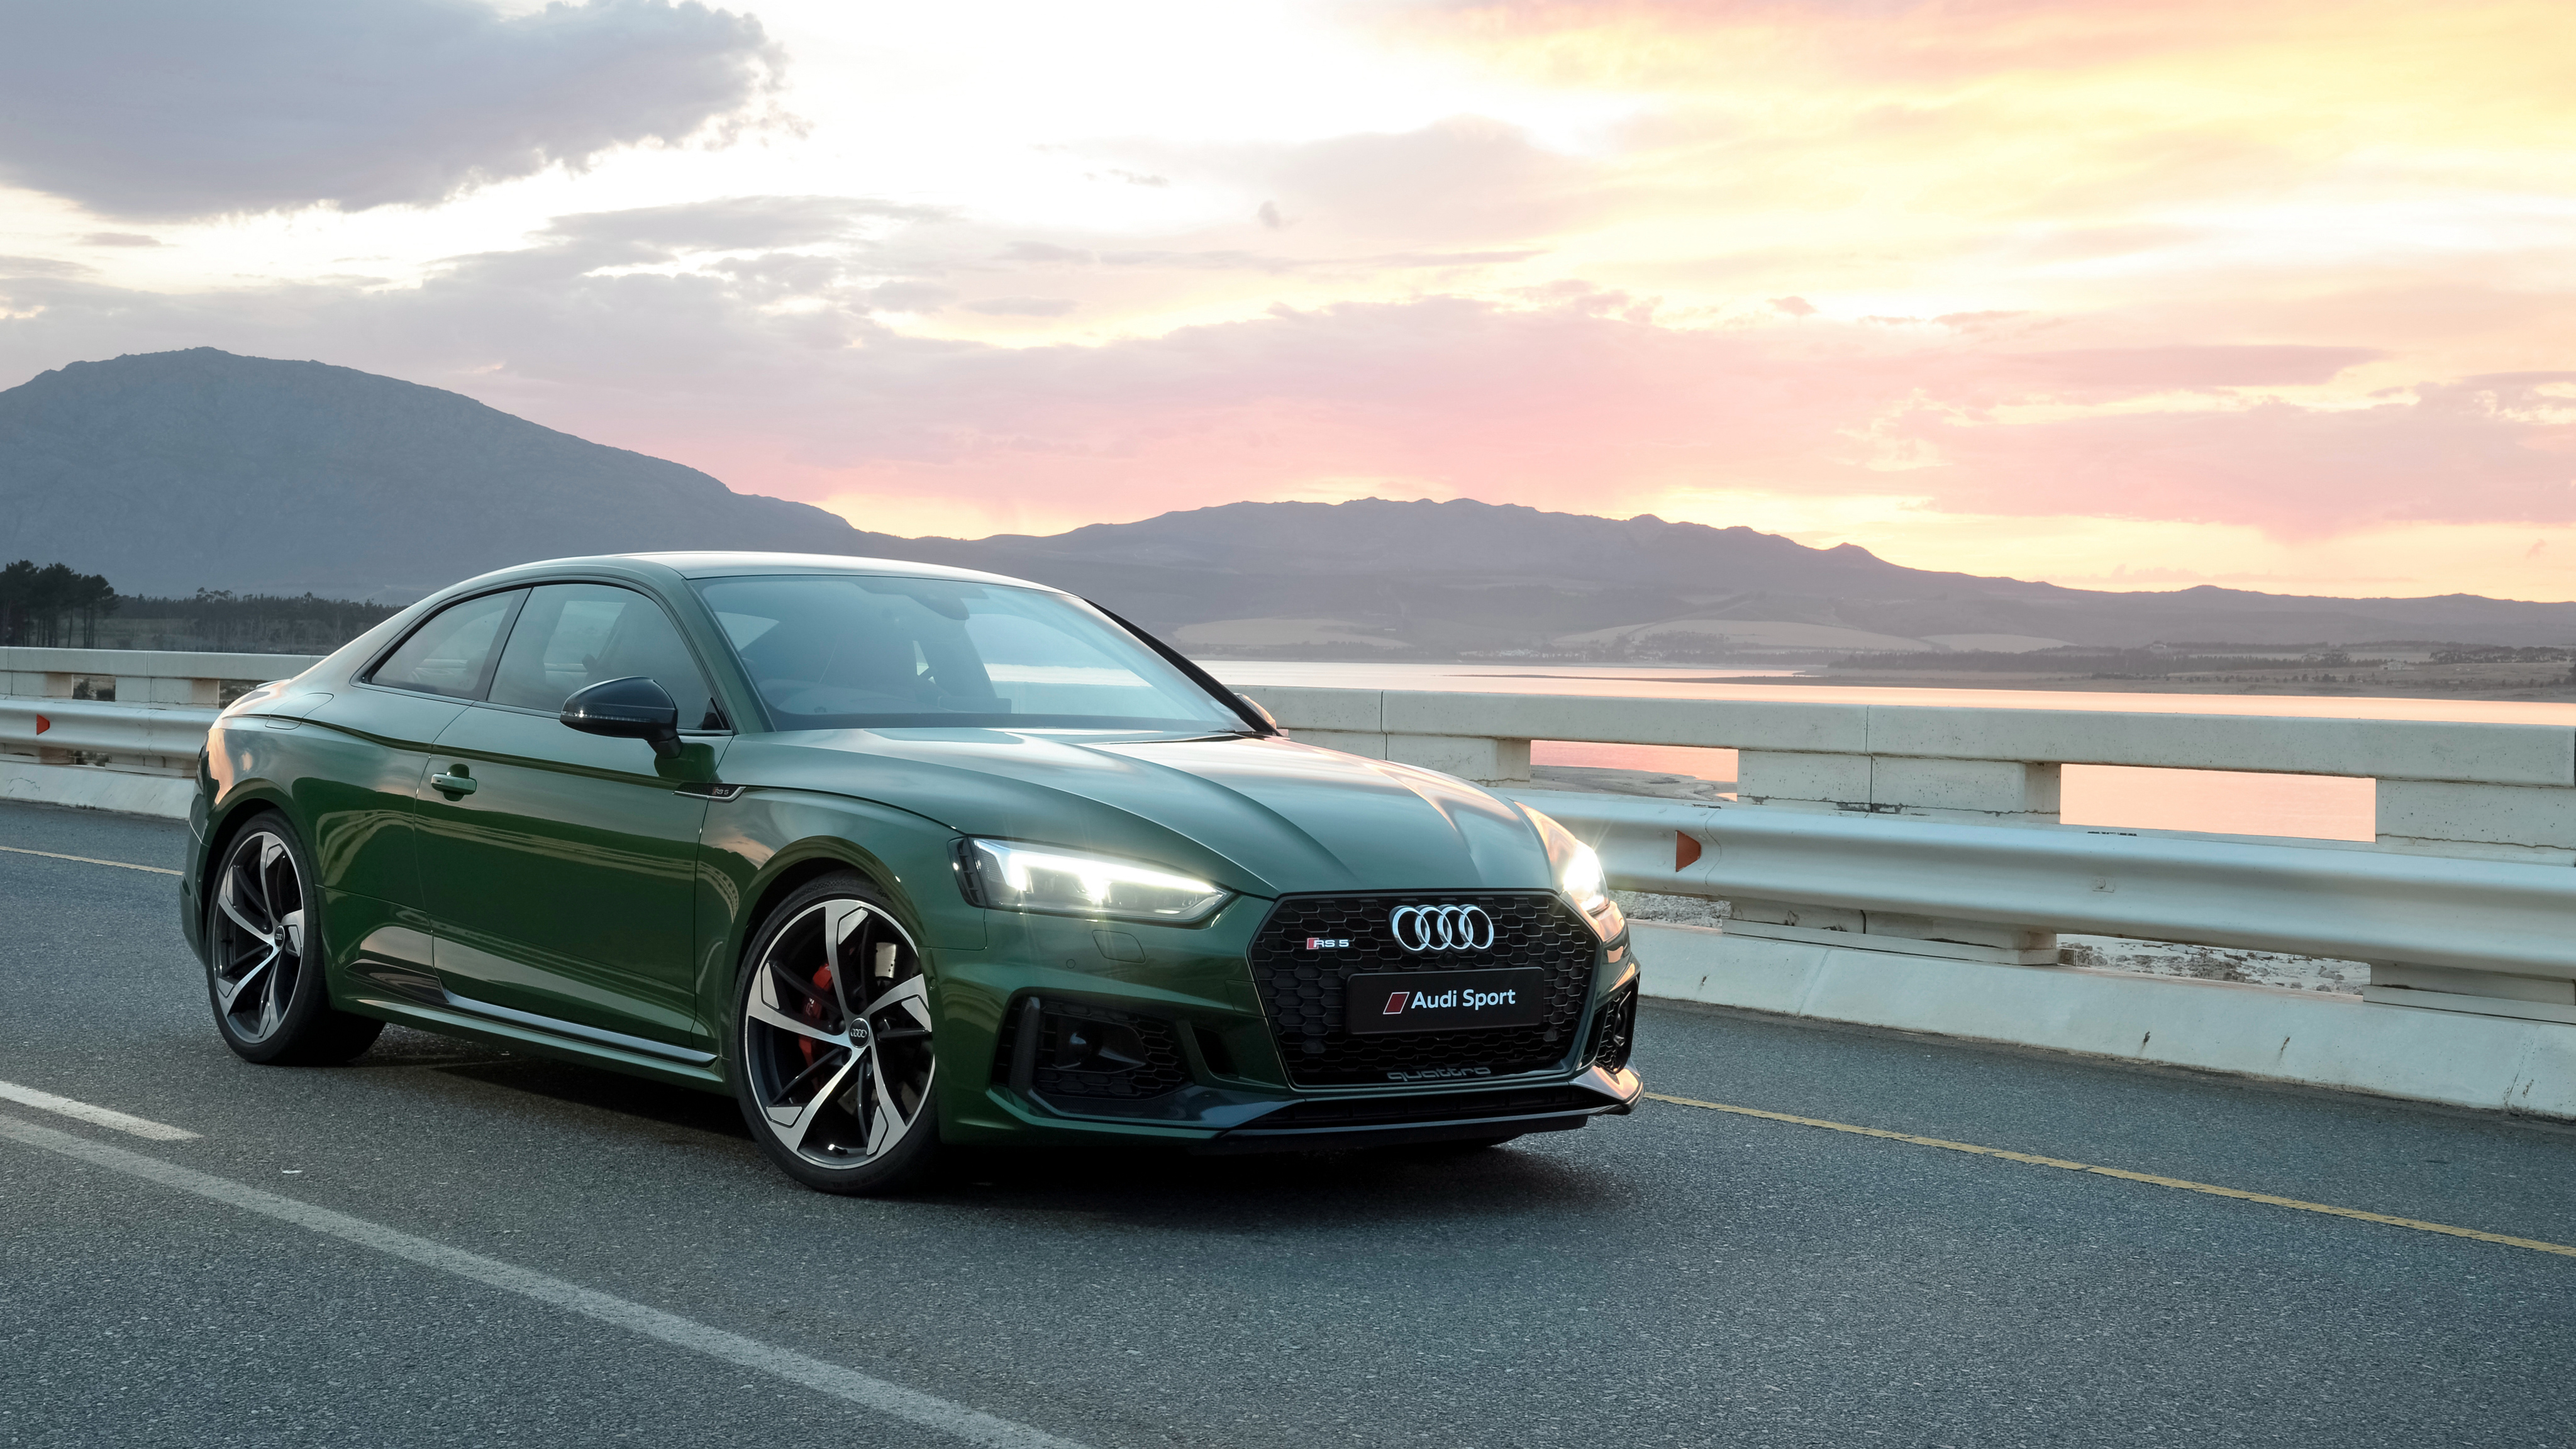 Audi RS5 Wallpapers and Background Images   stmednet